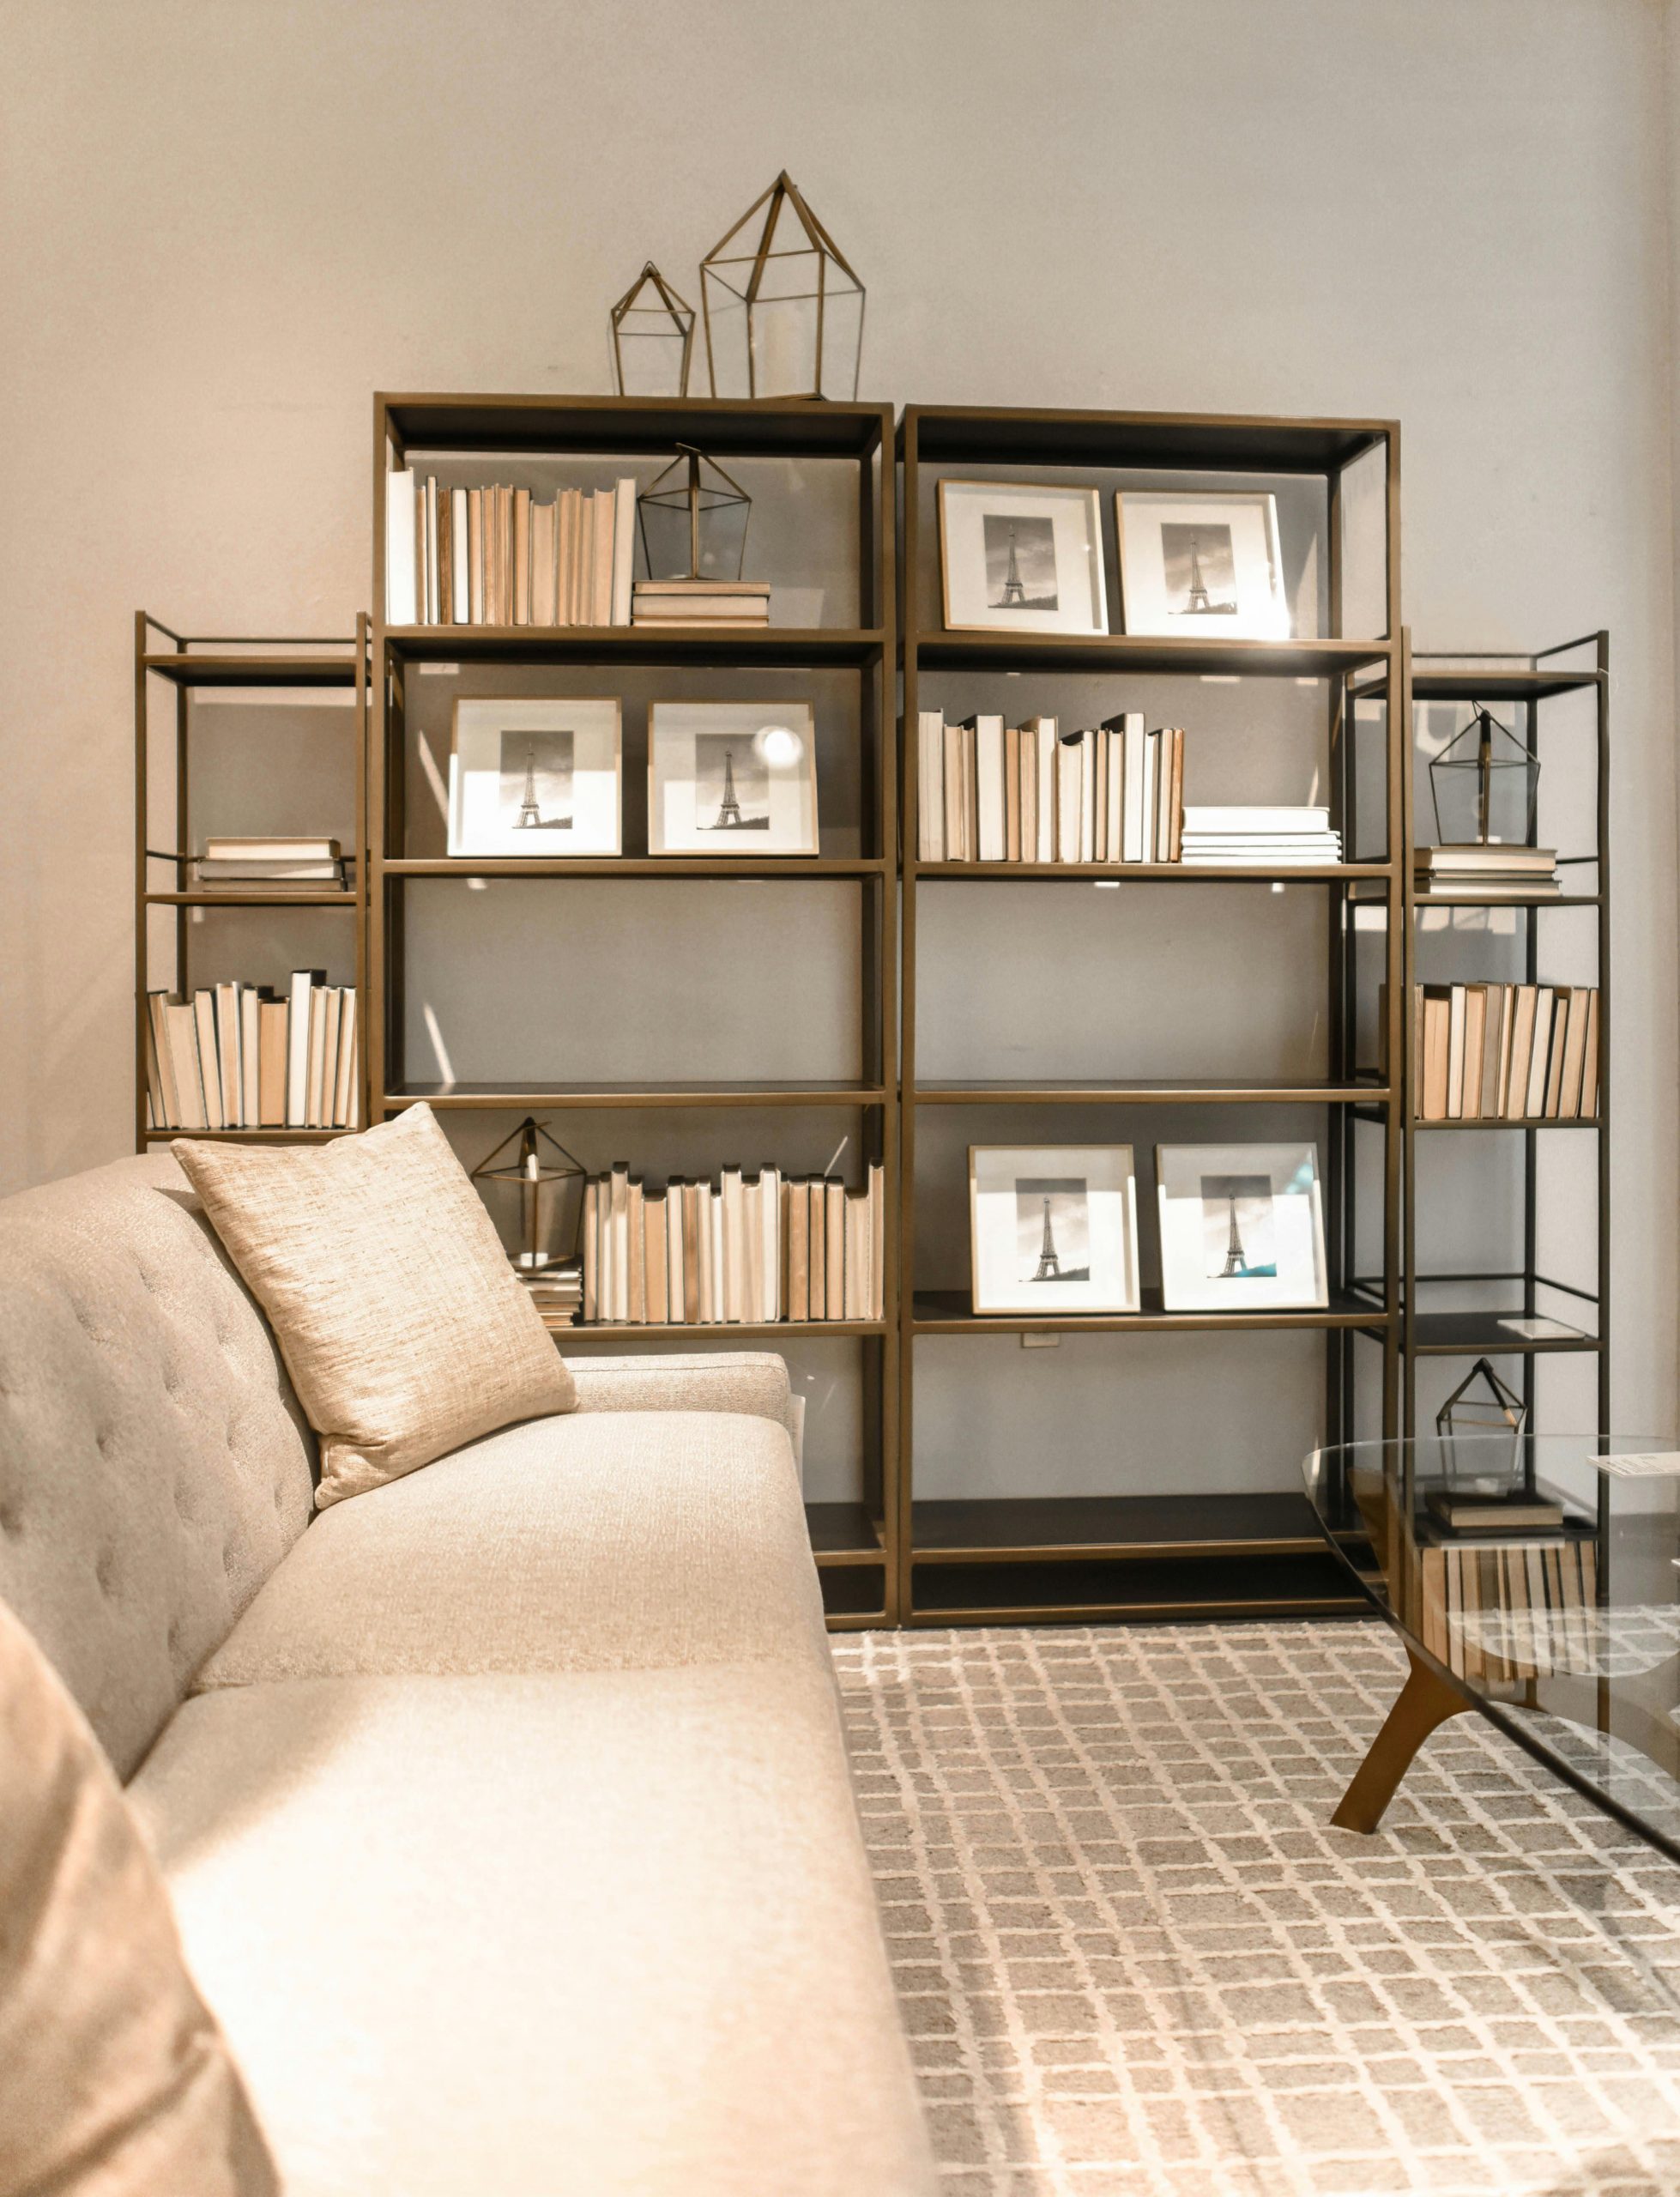 5 beautiful book storage ideas that double as decor